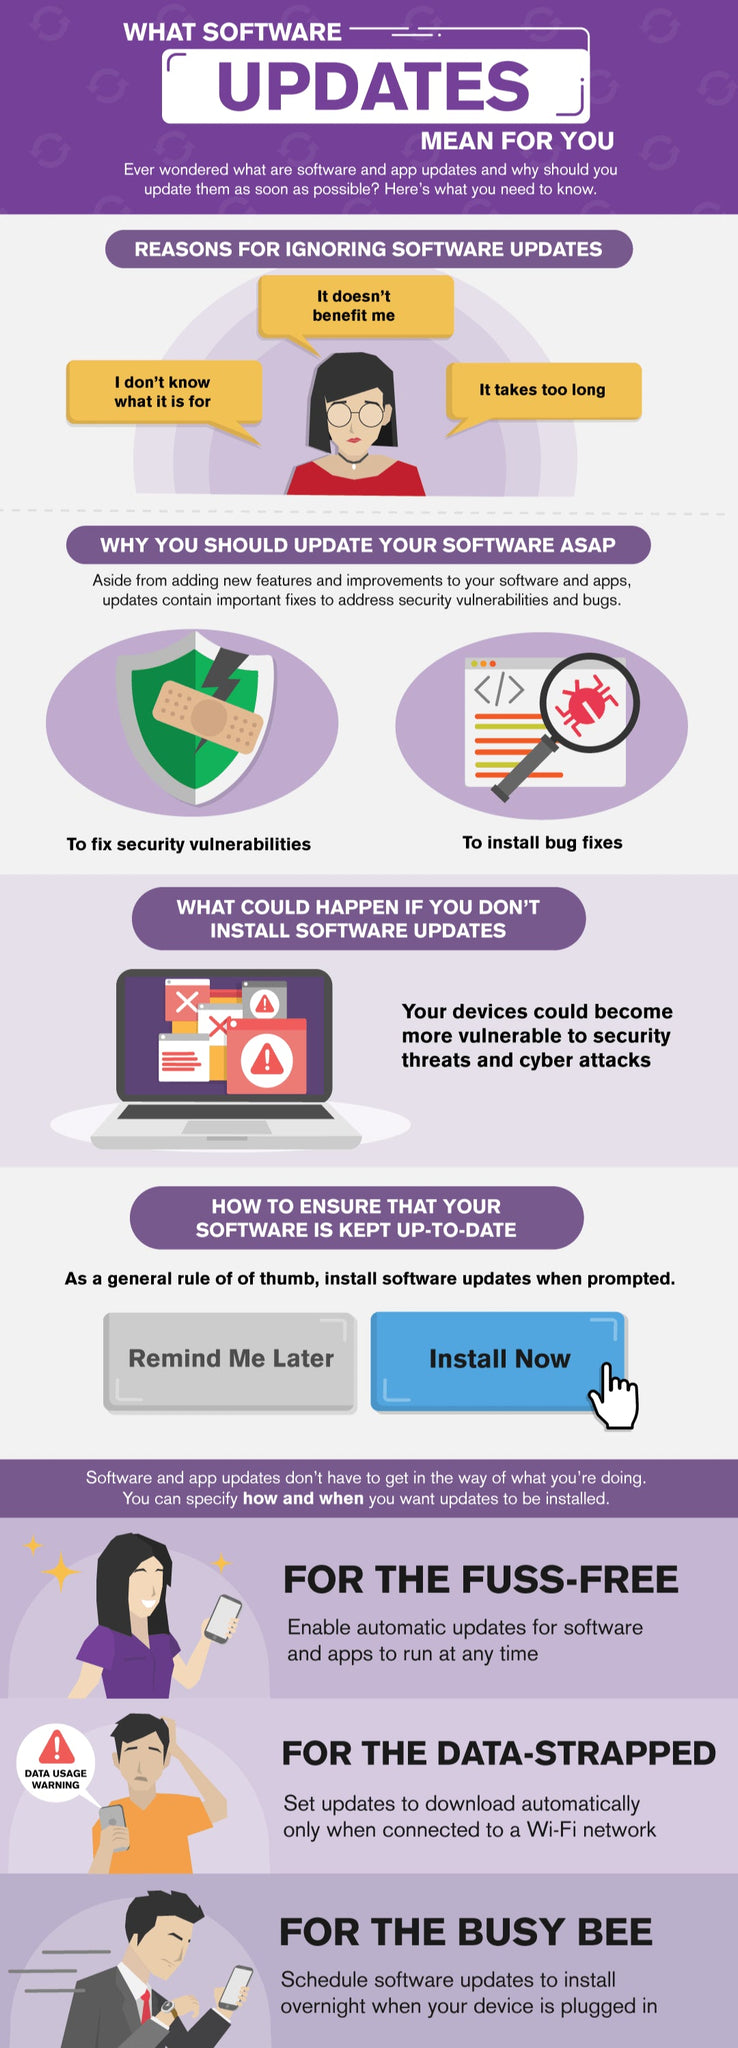 What software updates mean for you infographic